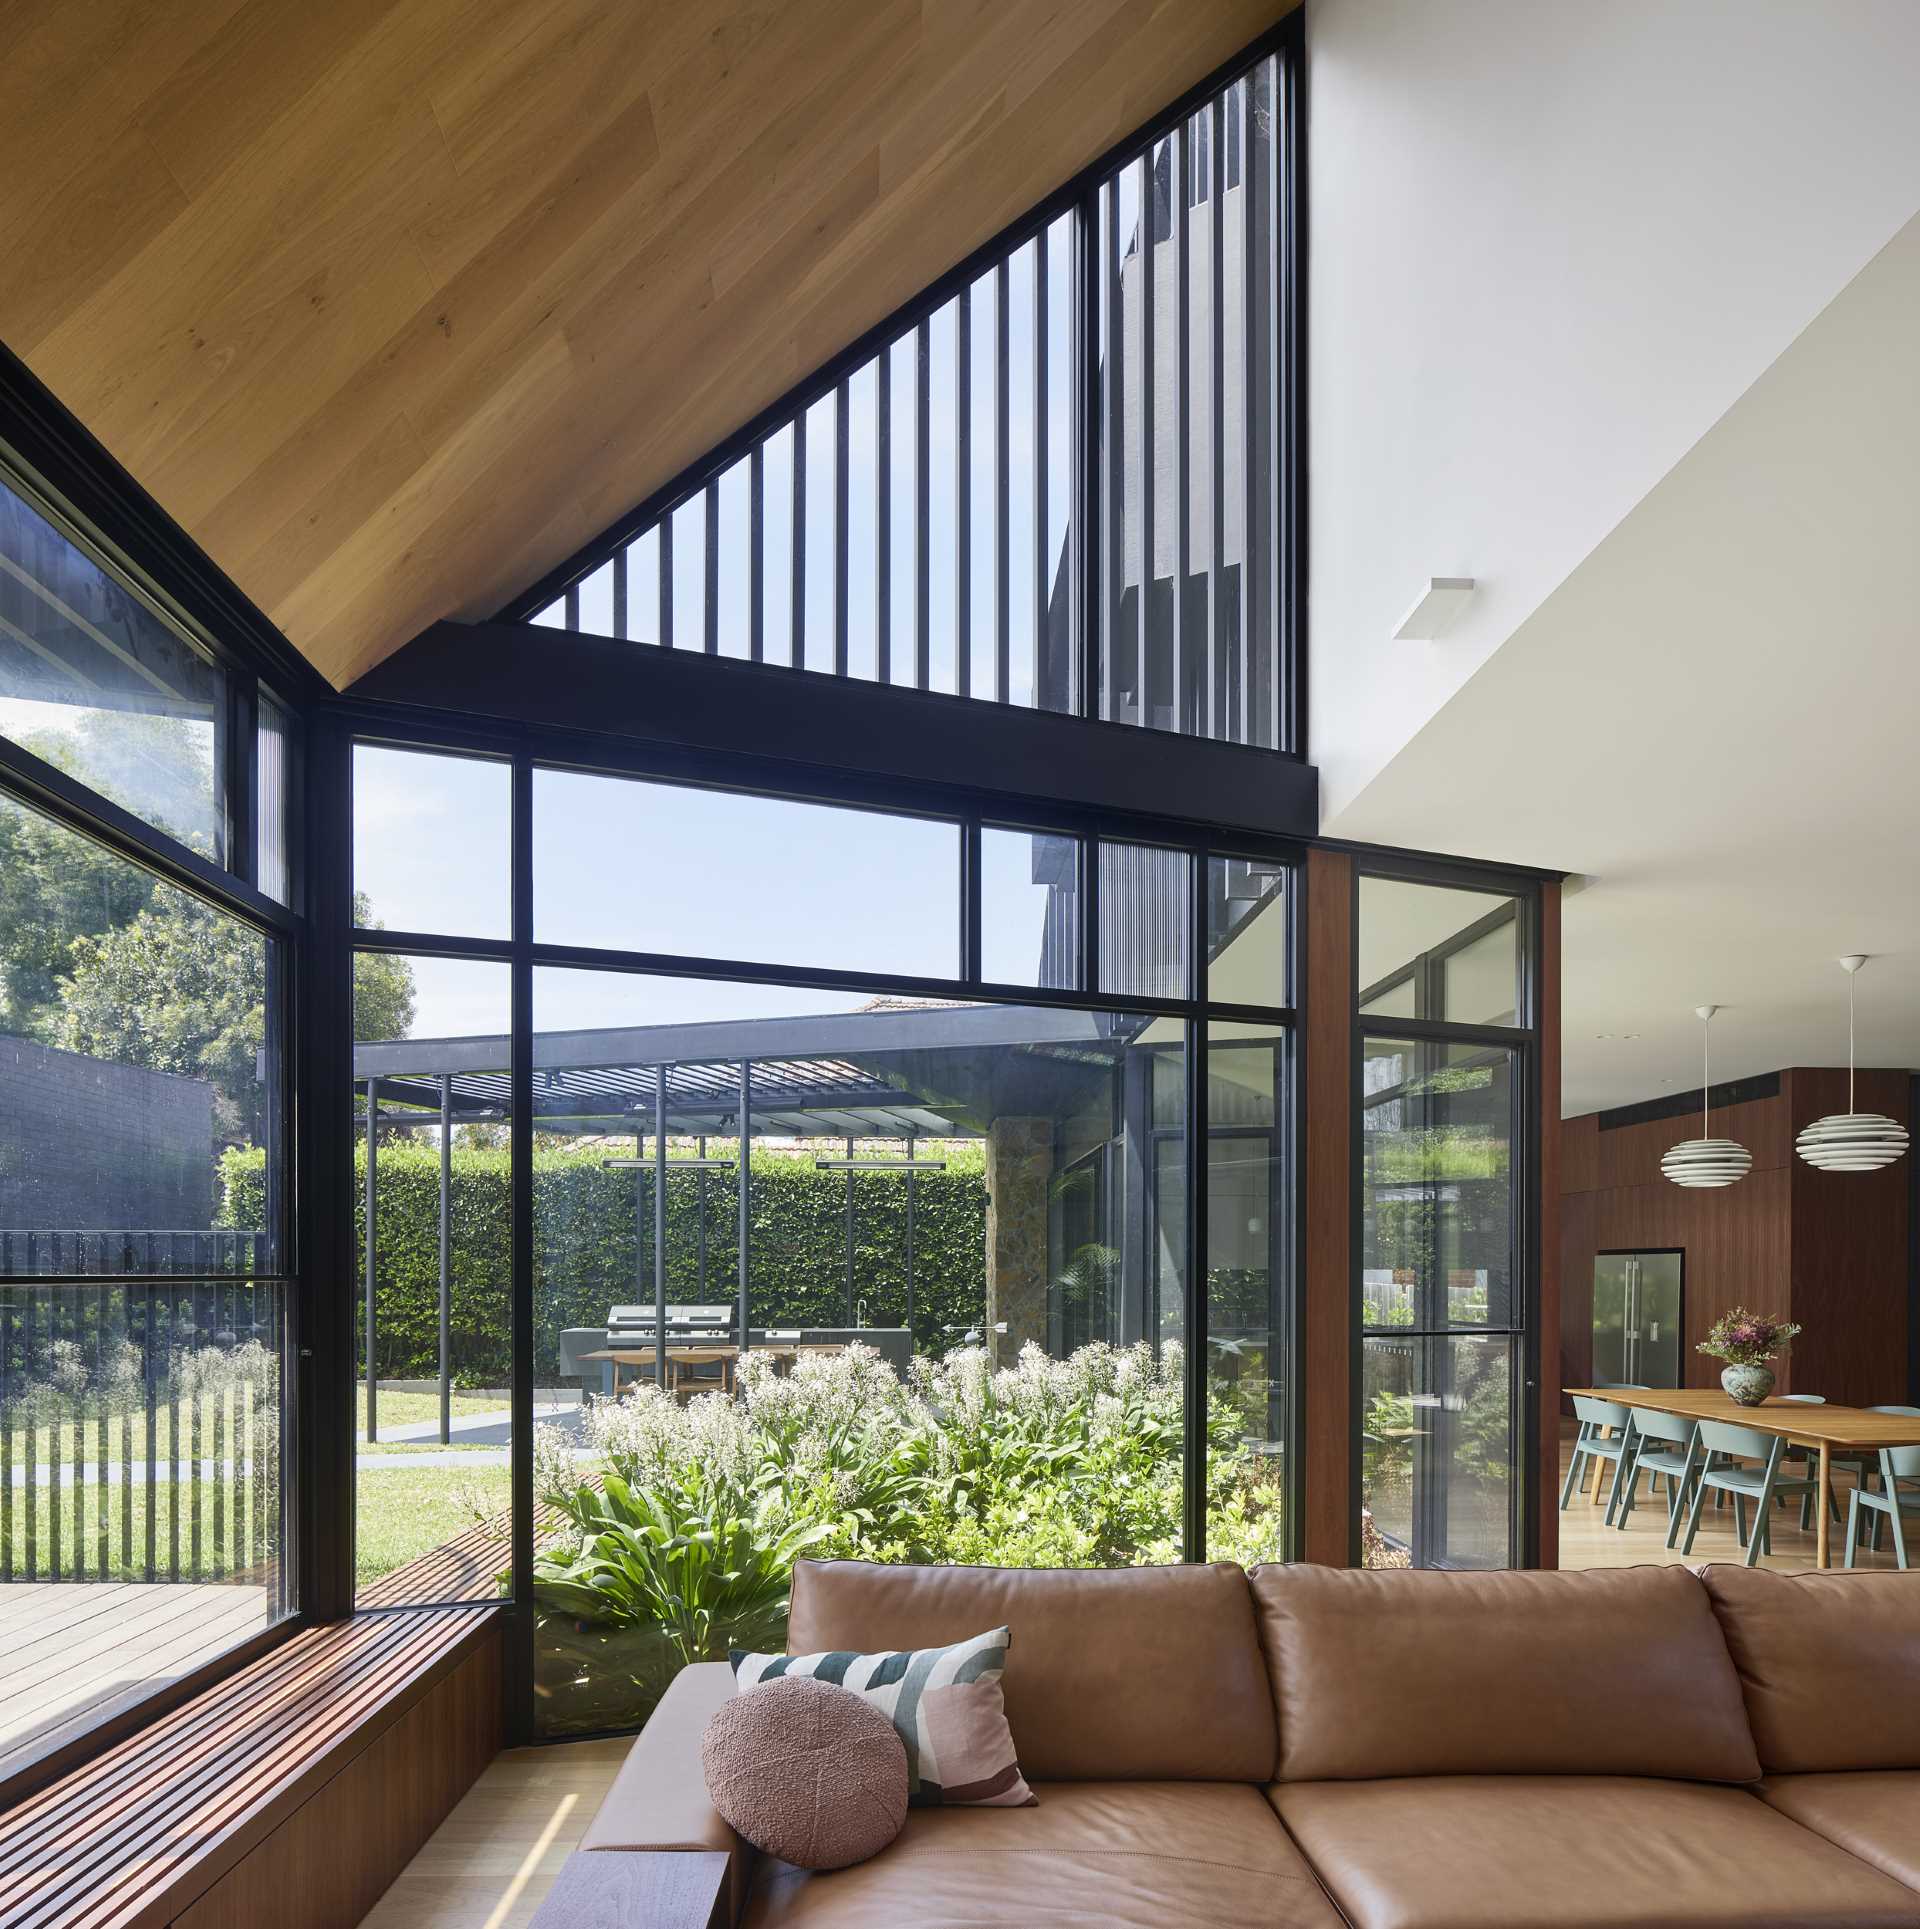 Inside this modern home, the stone wall by the swimming pool as well as the wood bench by the planter continue through to the living room which is filled with natural light from the windows.